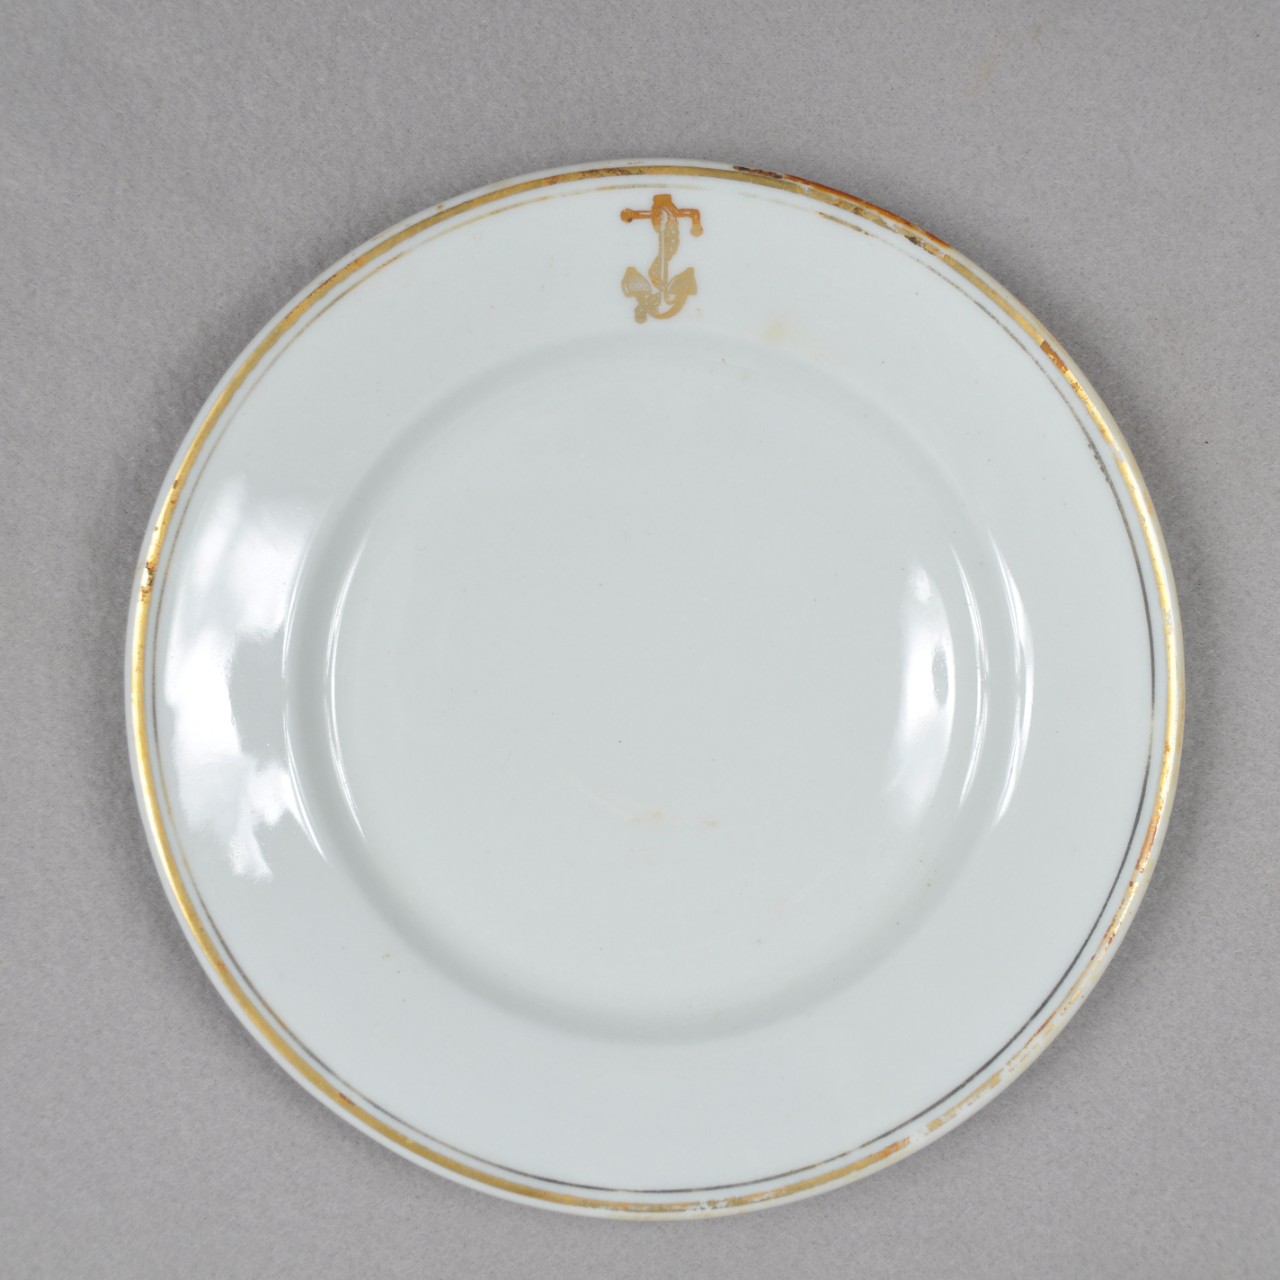 <p>A white ceramic plate with two concentric gold rings around the edge on the face of the plate. There is also a gold anchor with a chain wrapped around it on the lip.</p>
